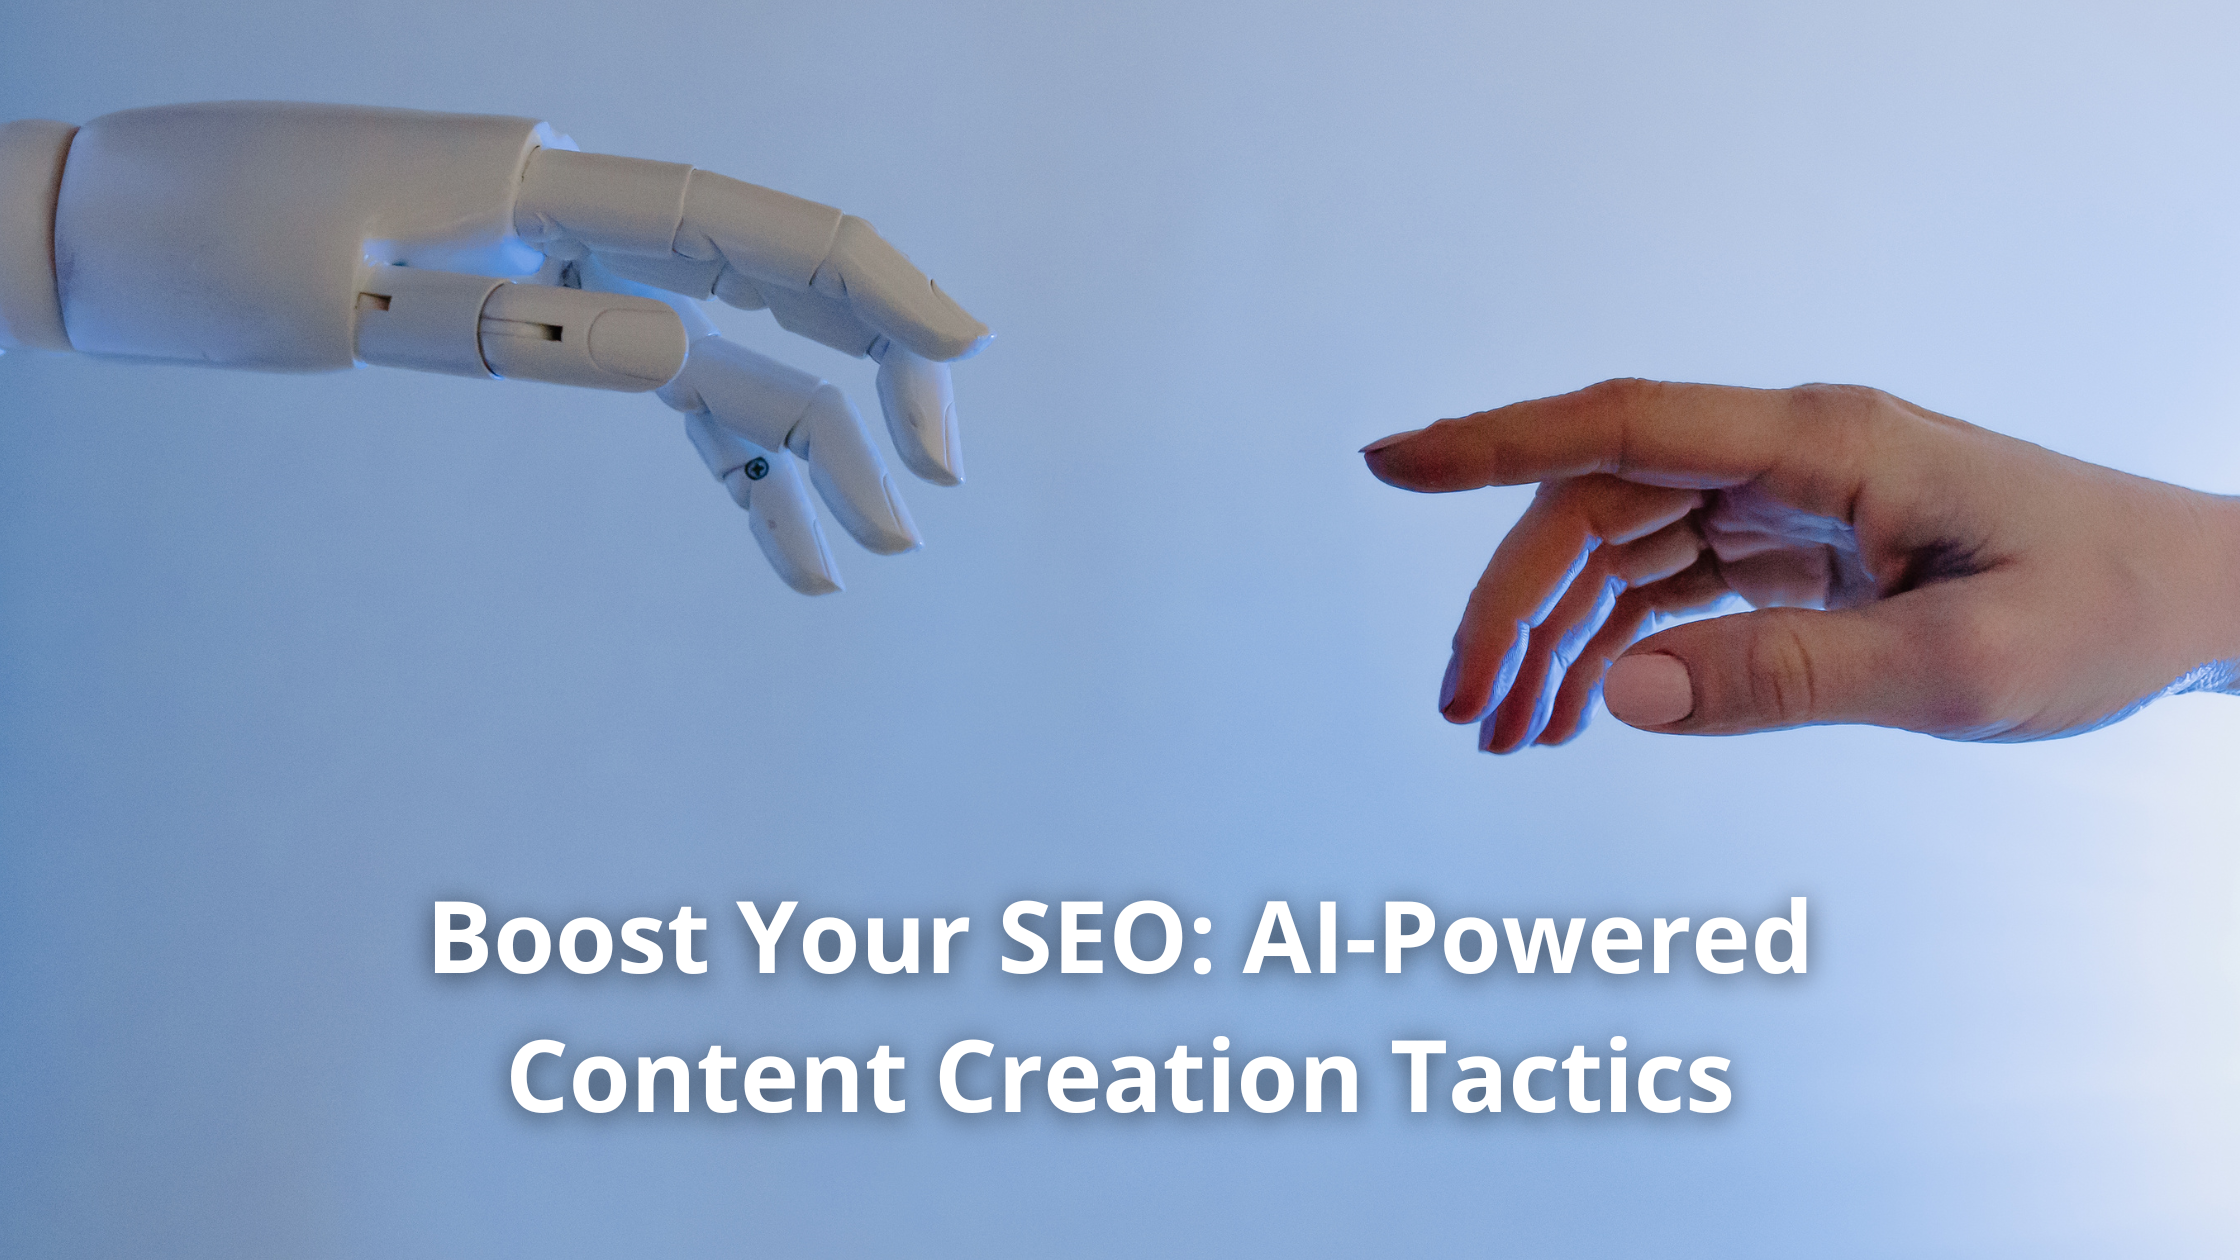 Boost Your SEO - AI-Powered Content Creation Tactics